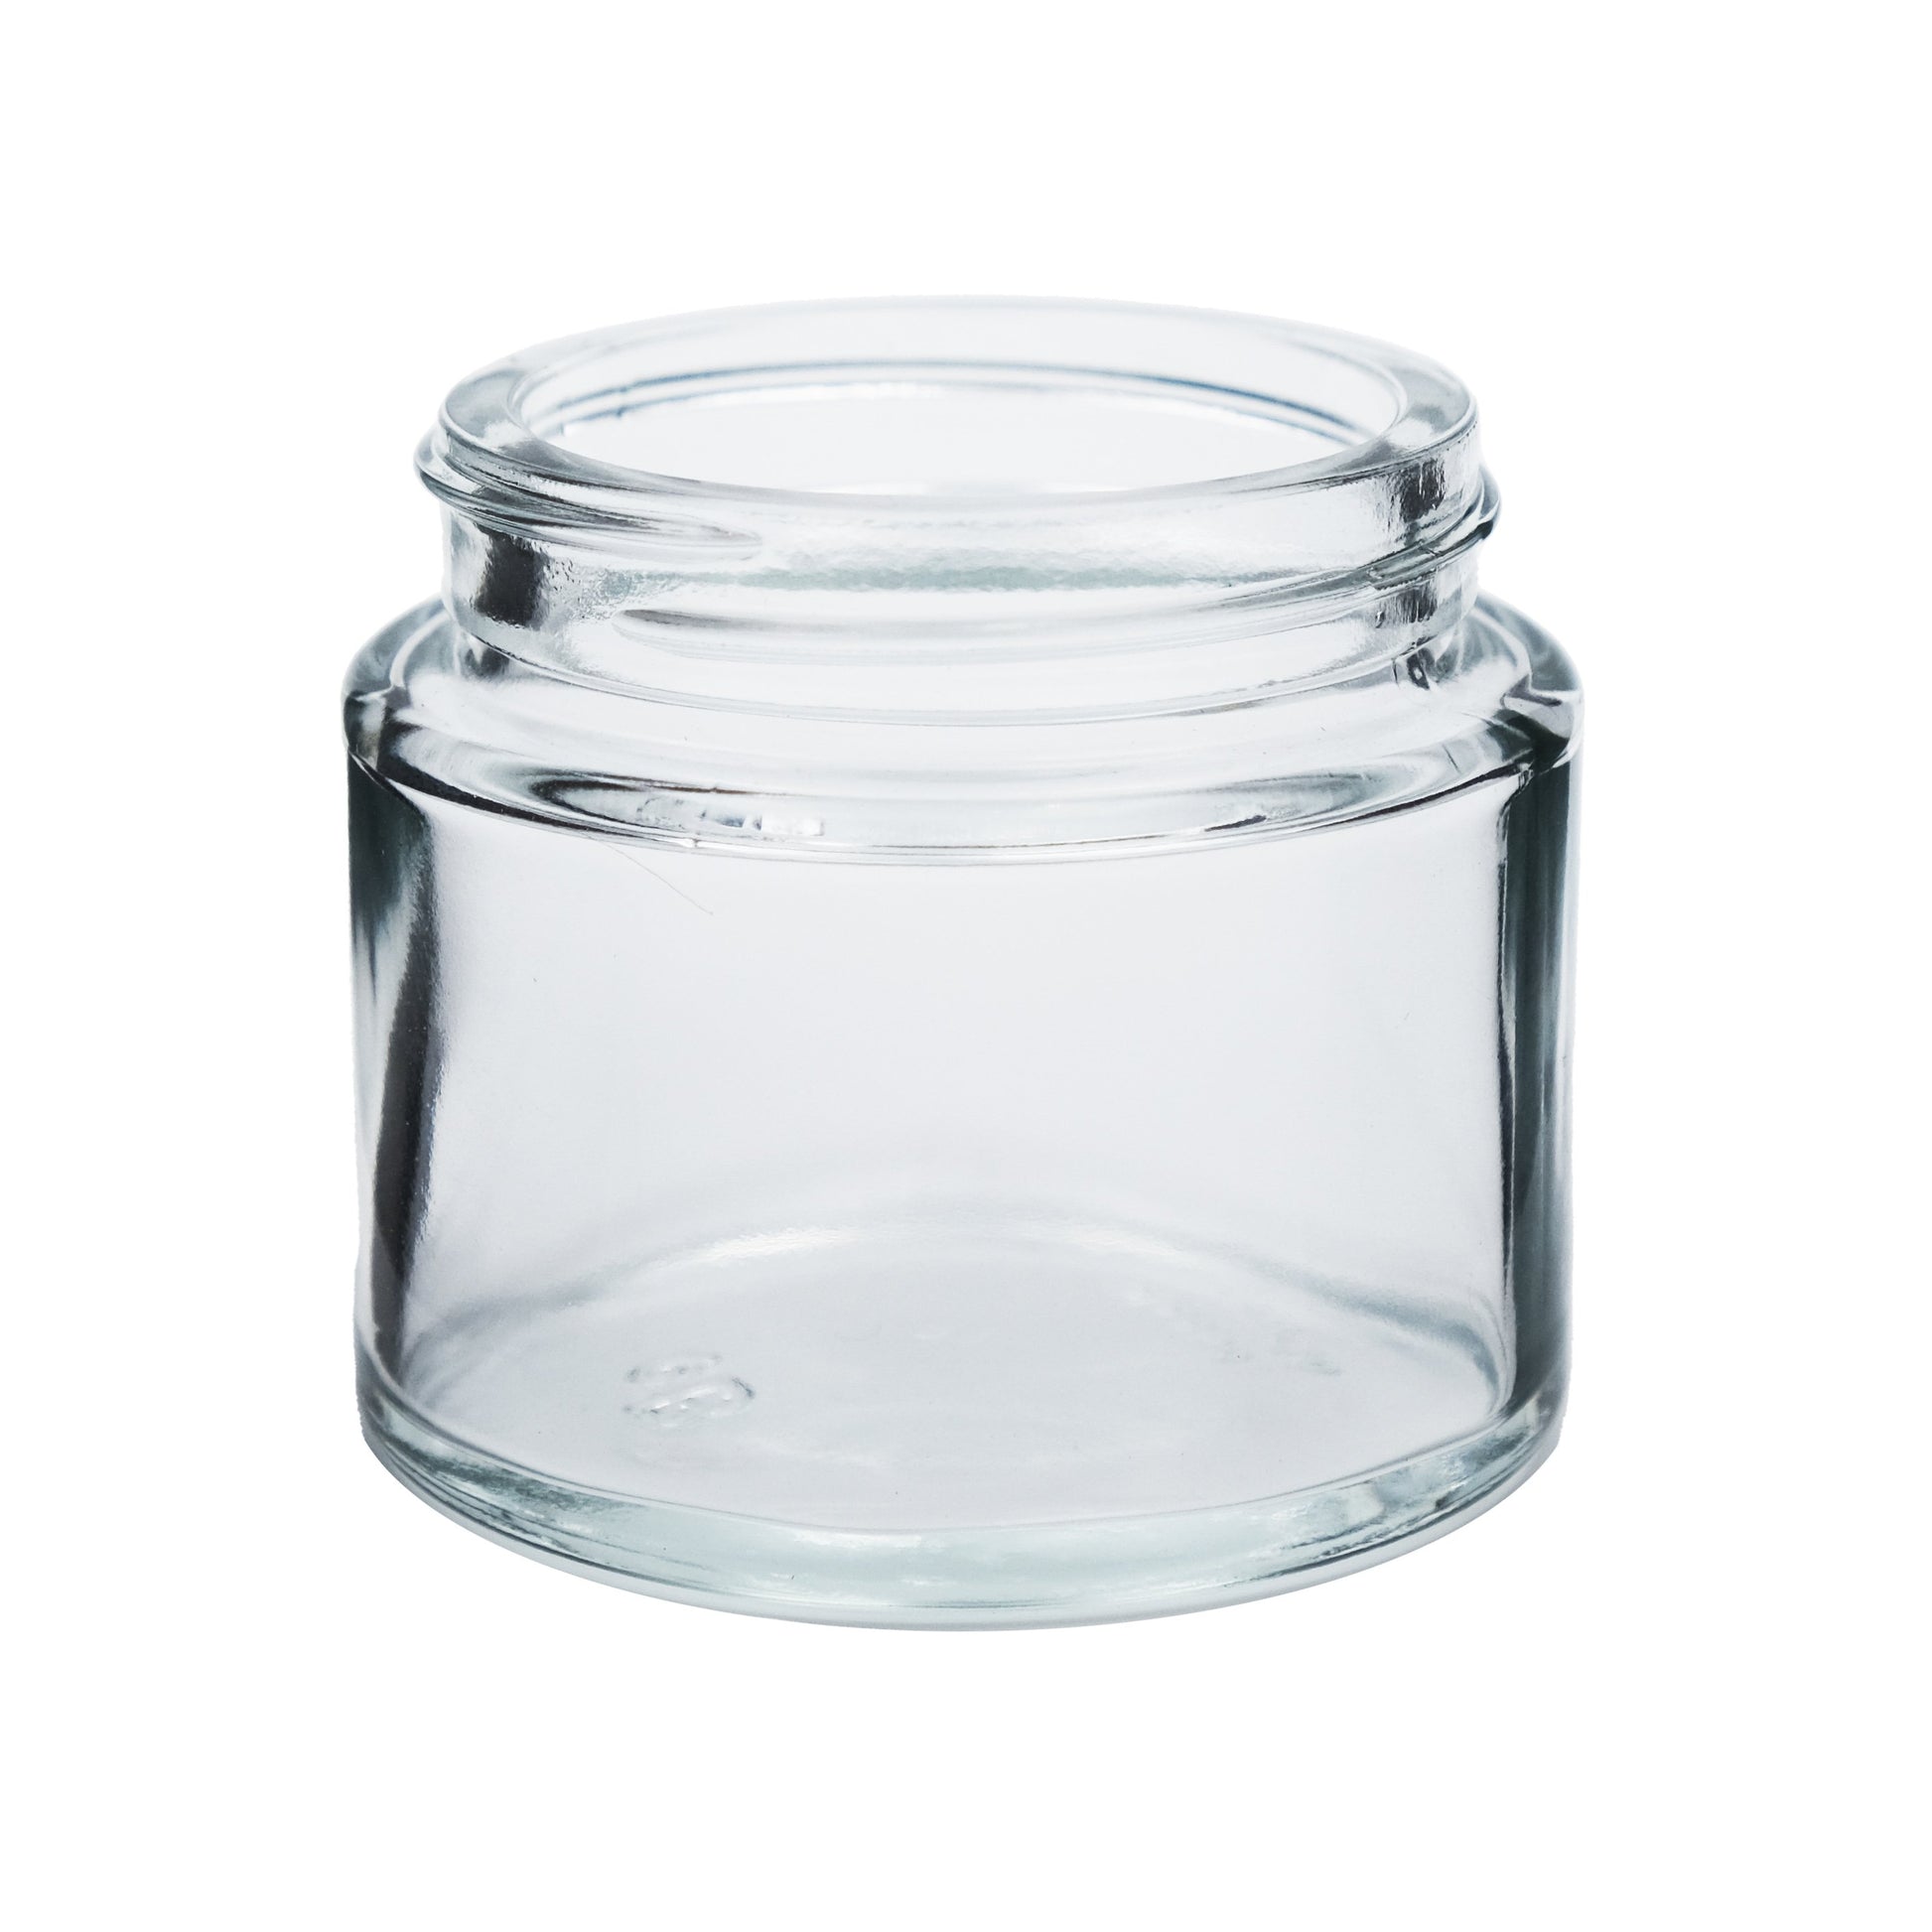 Promotional 20 oz Durable Clear Glass Bottle with Screw on Lid